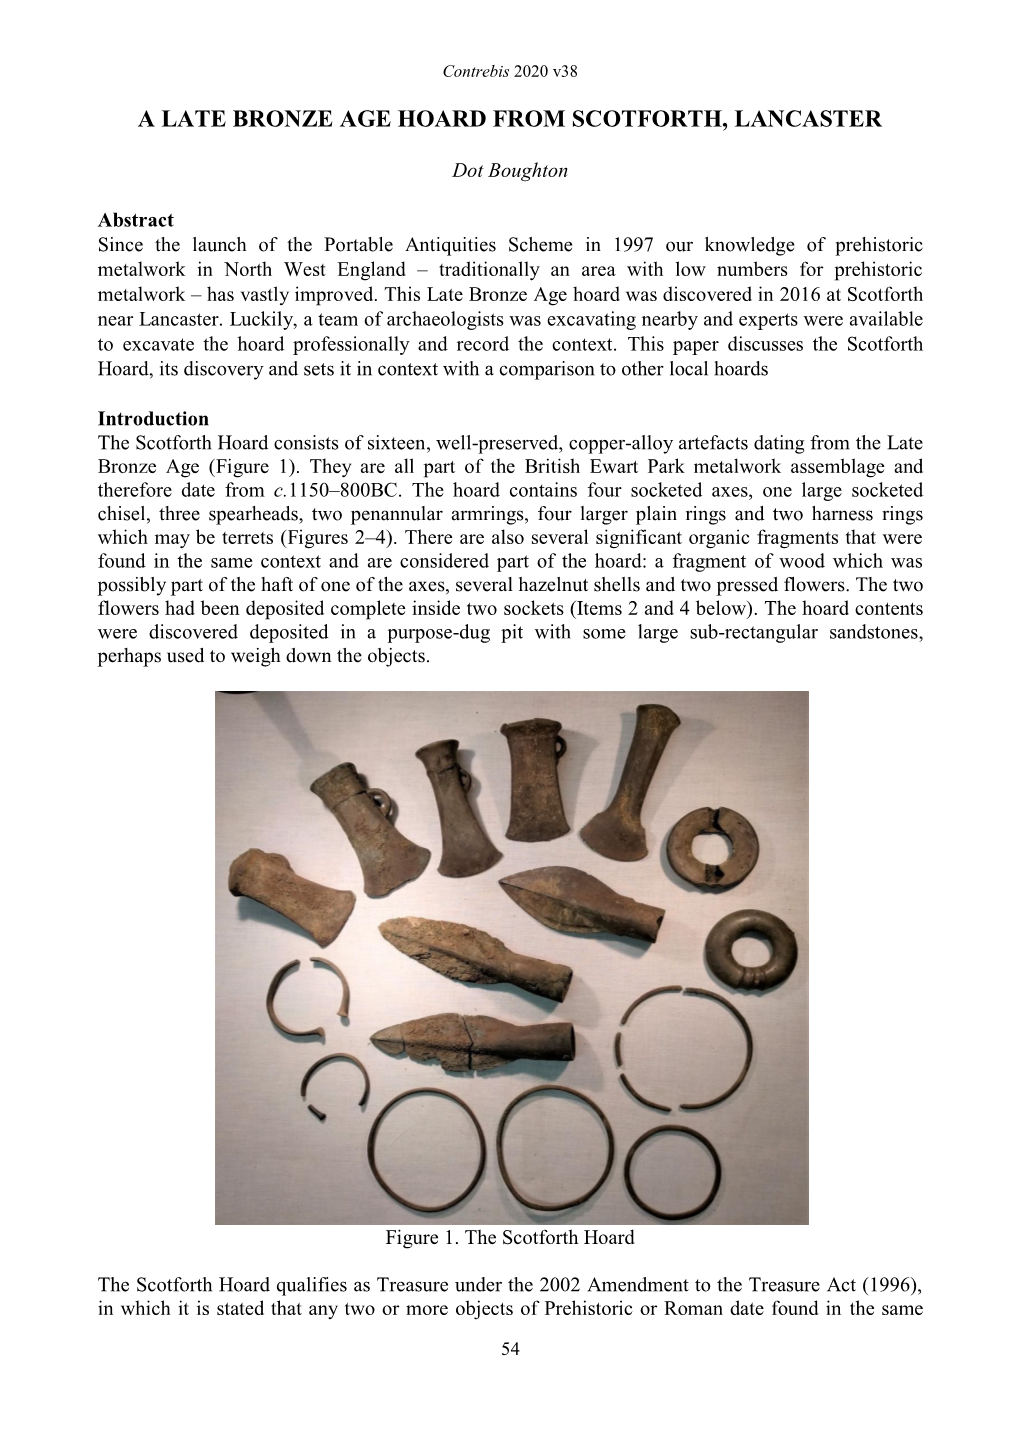 A Late Bronze Age Hoard from Scotforth, Lancaster